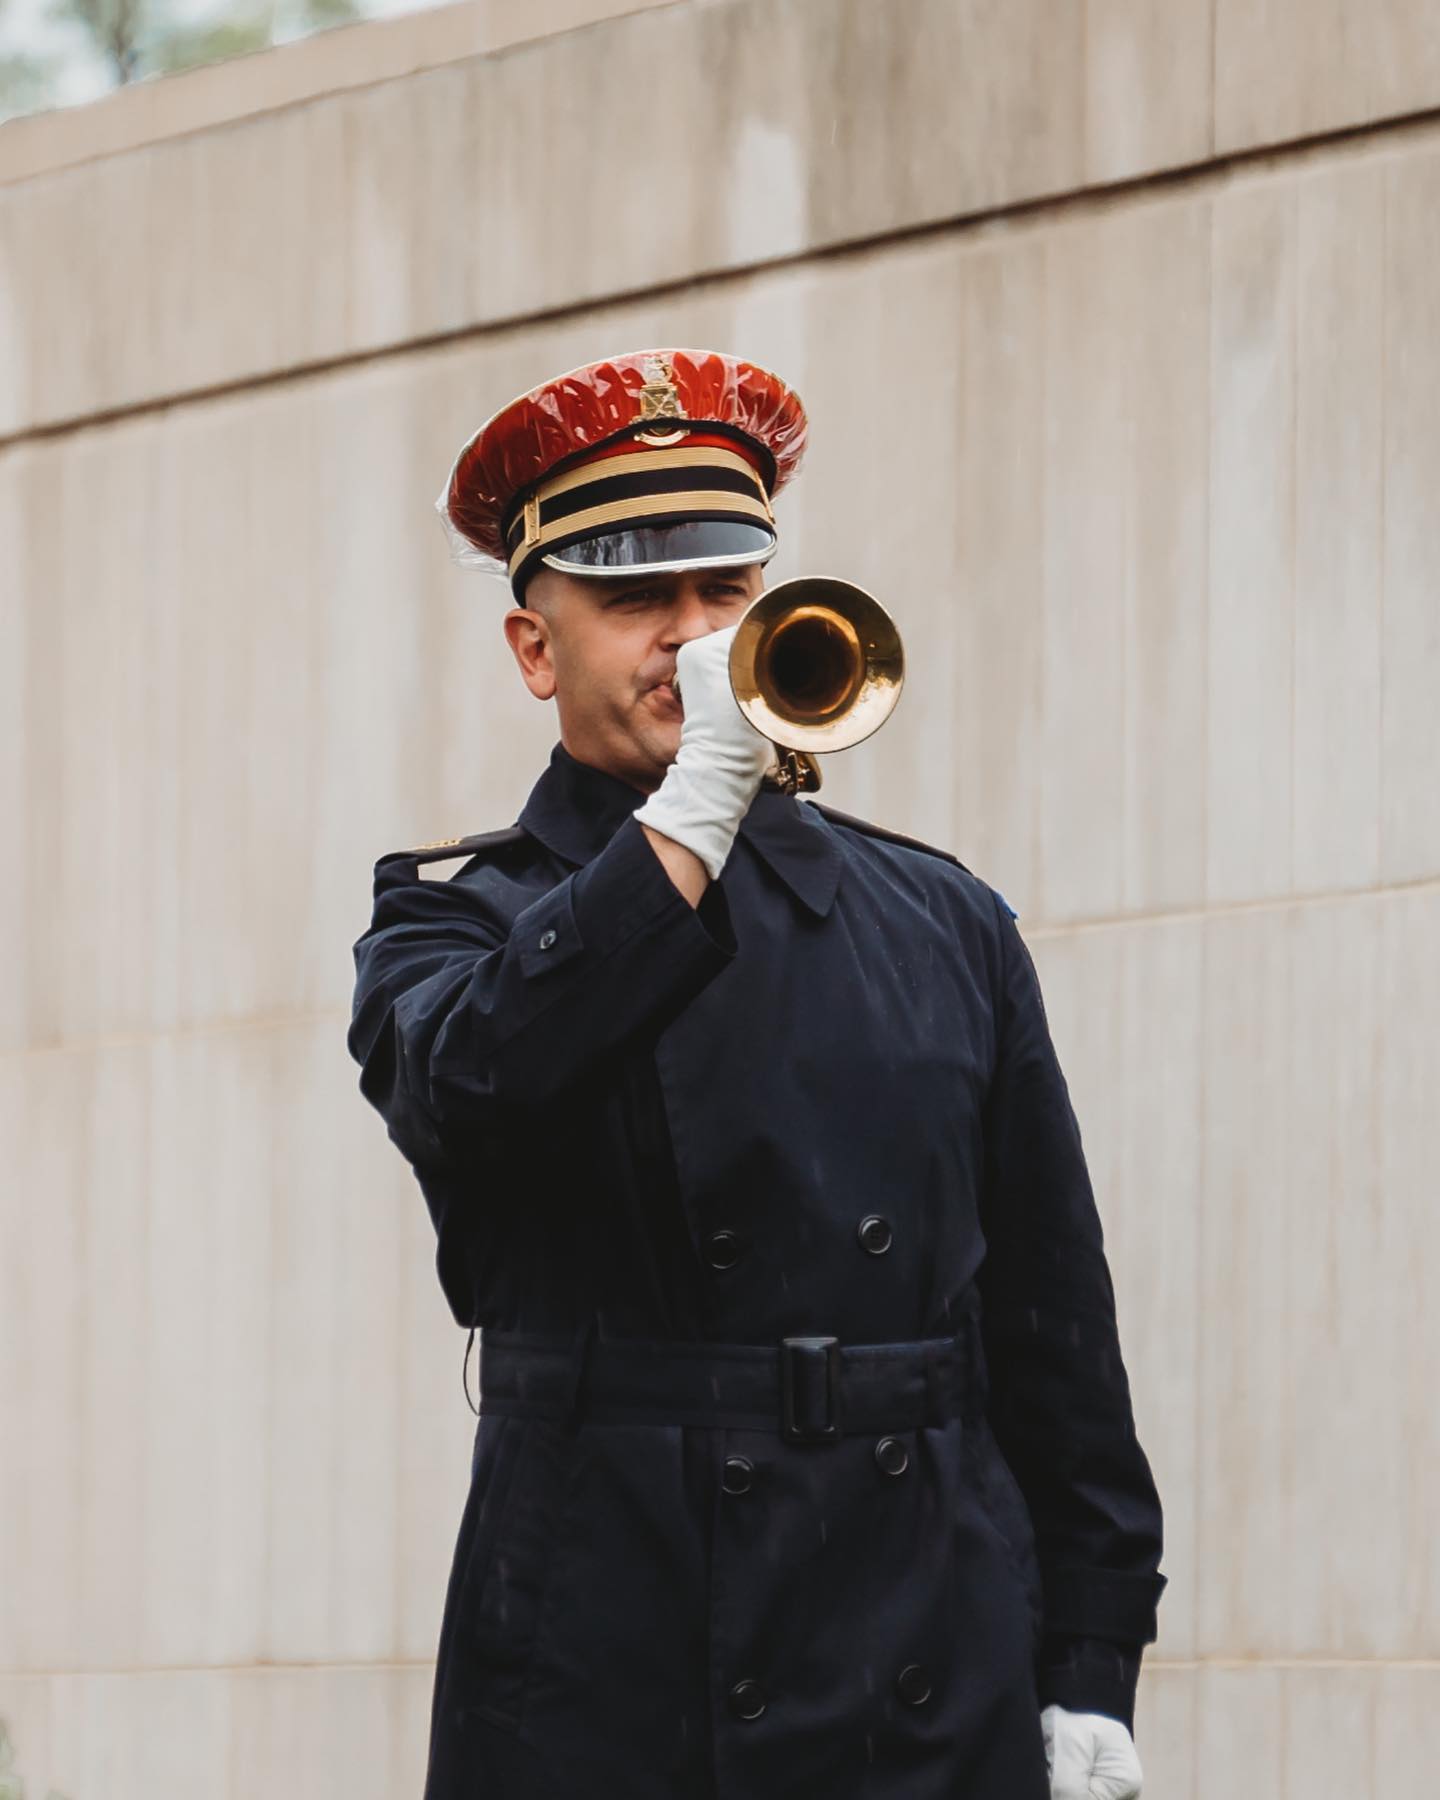 A bugler from the U.S. Army Band, "Pershing's Own", plays Taps during modified military funeral honors for a U.S. Army Service outside of Court 8 of the Columbarium at Arlington National Cemetery, Arlington, Virginia in June of 2020, during a rainstorm.